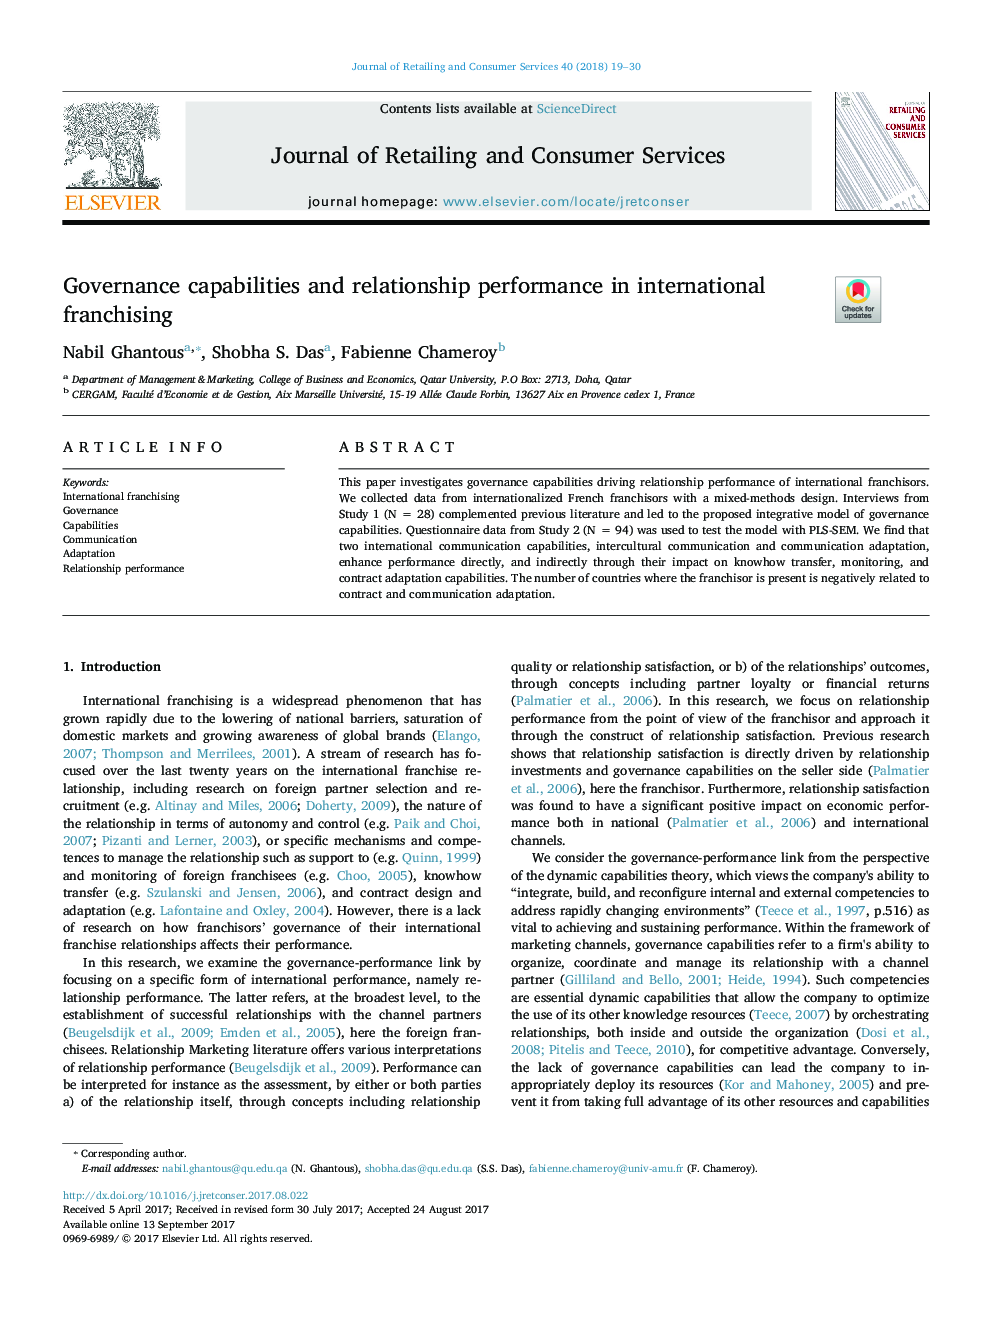 Governance capabilities and relationship performance in international franchising